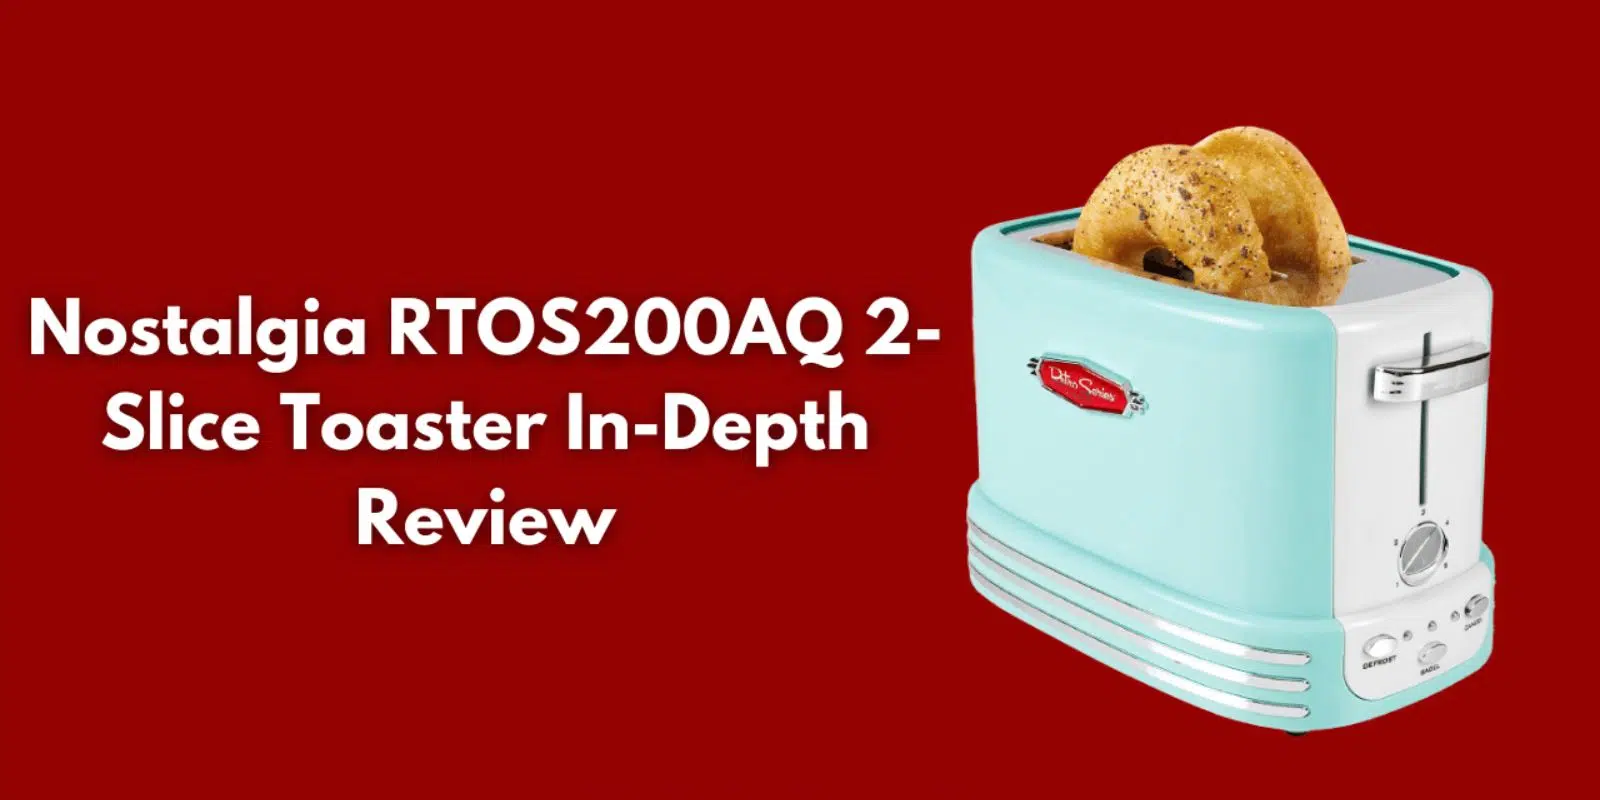 Nostalgia RTOS200AQ 2-Slice Toaster In-Depth Review: Specification, Benefits, Pros & Cons